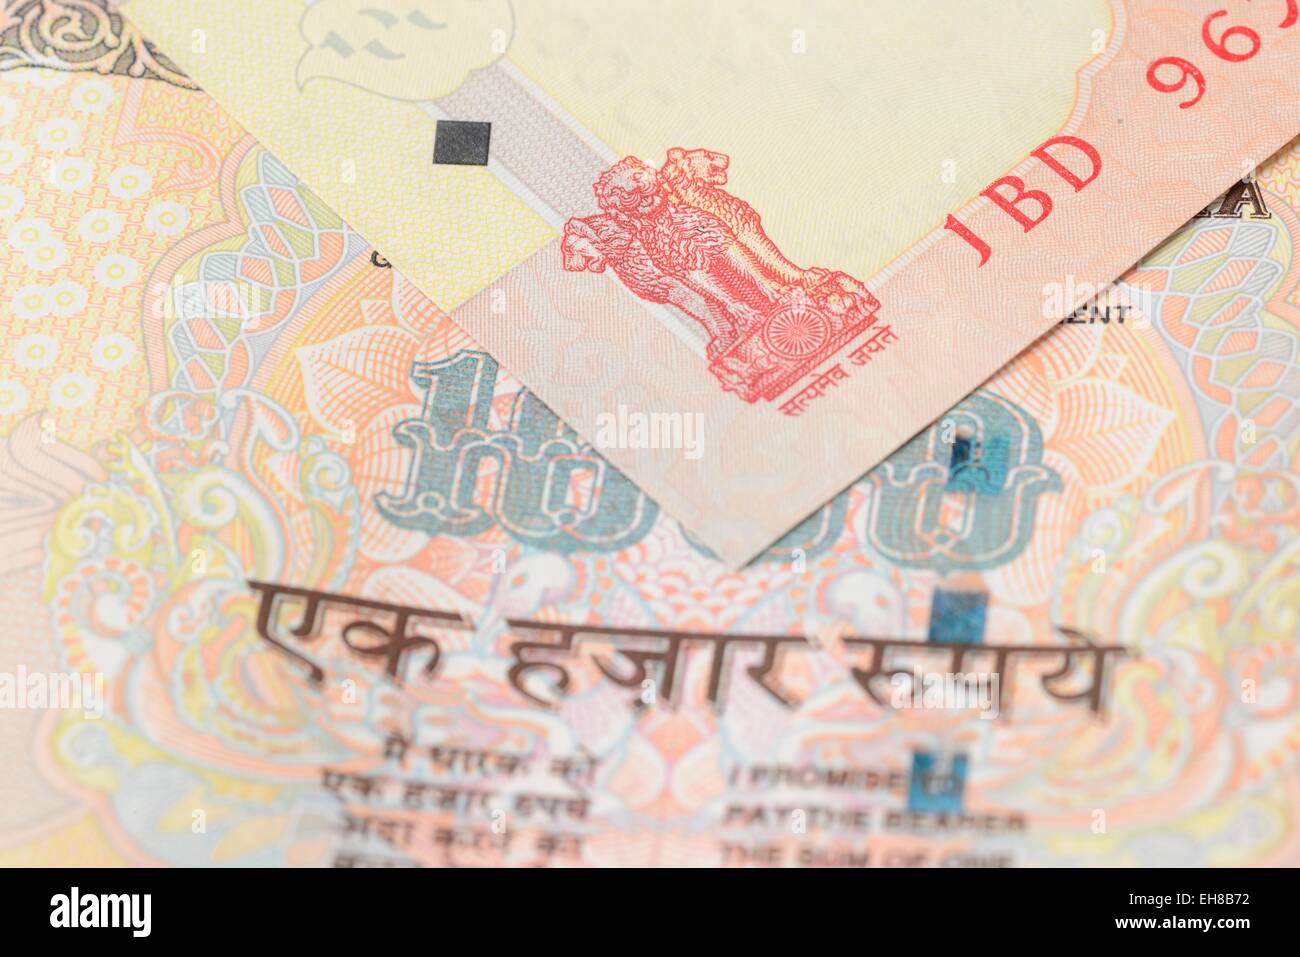 Indian Currency of One Thousand Rupees. Stock Photo